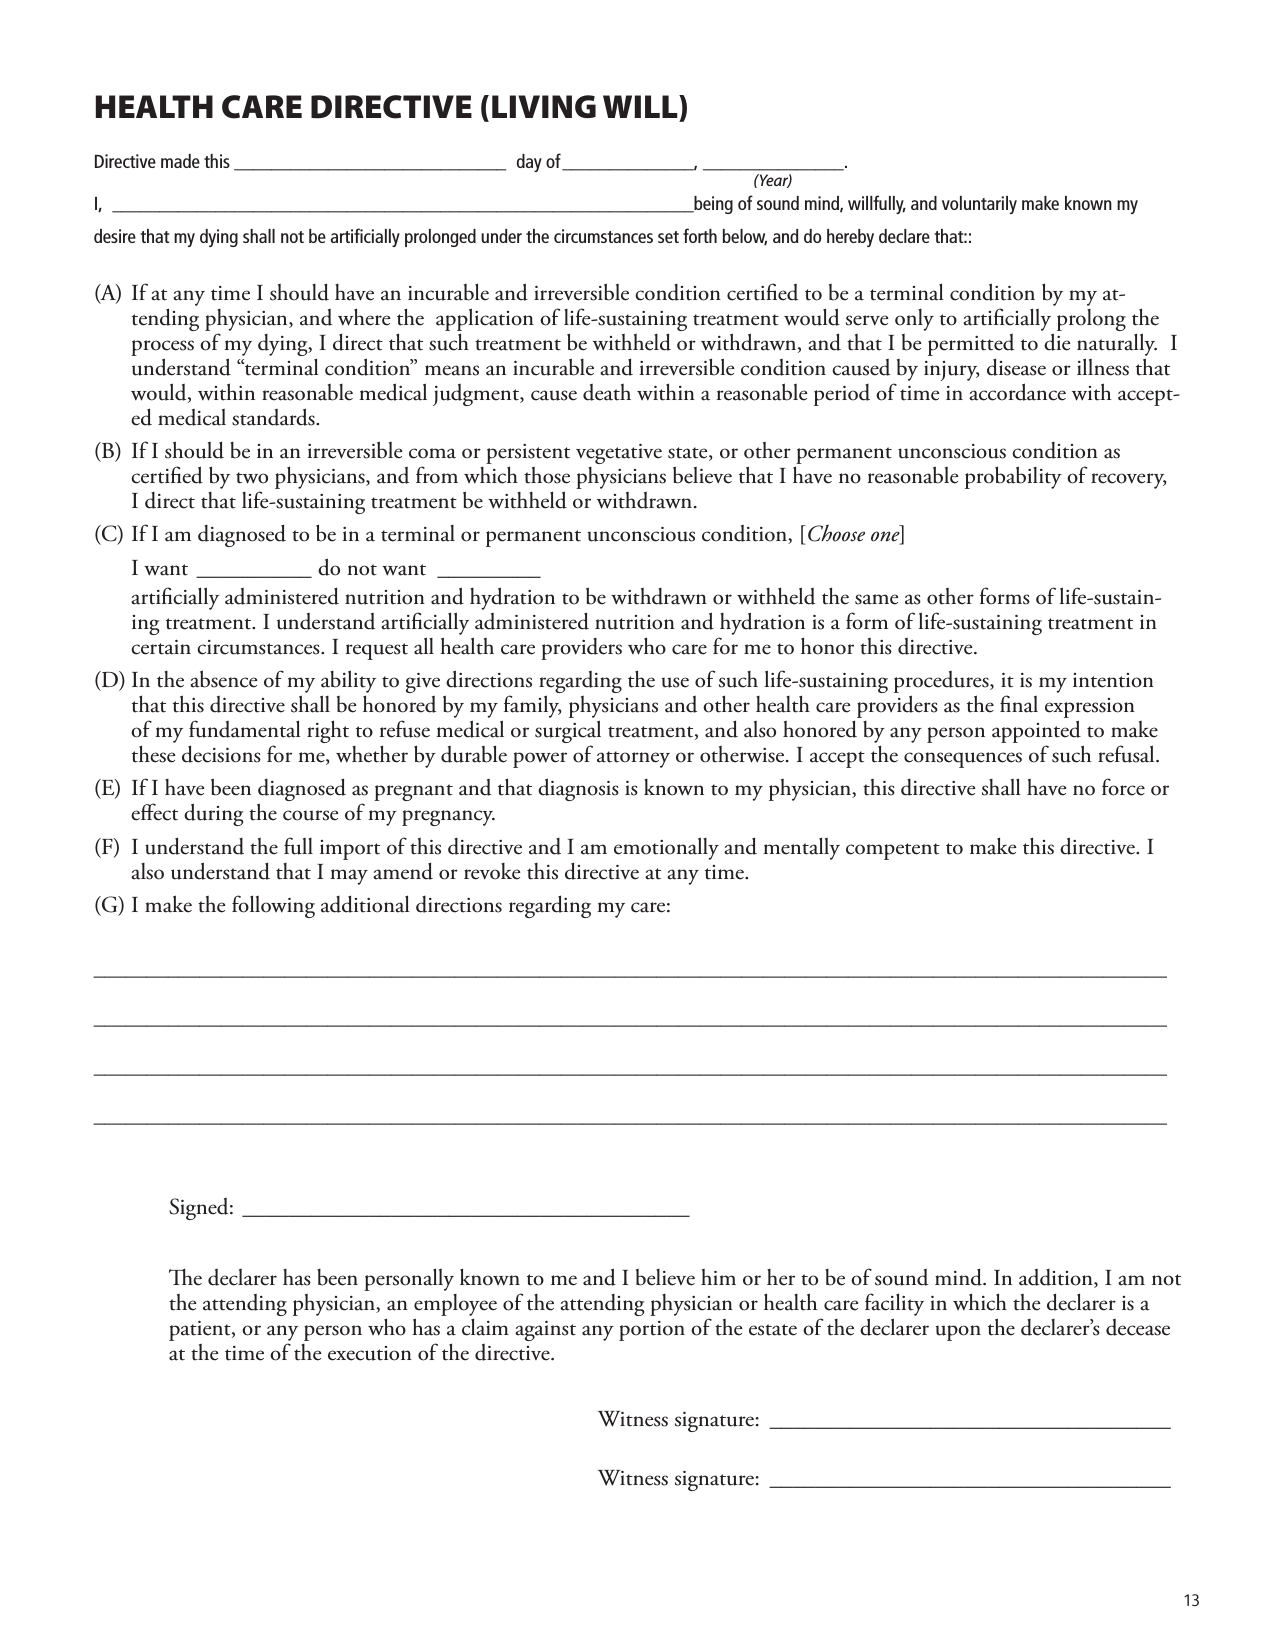 Download Washington Living Will Form Advance Directive 